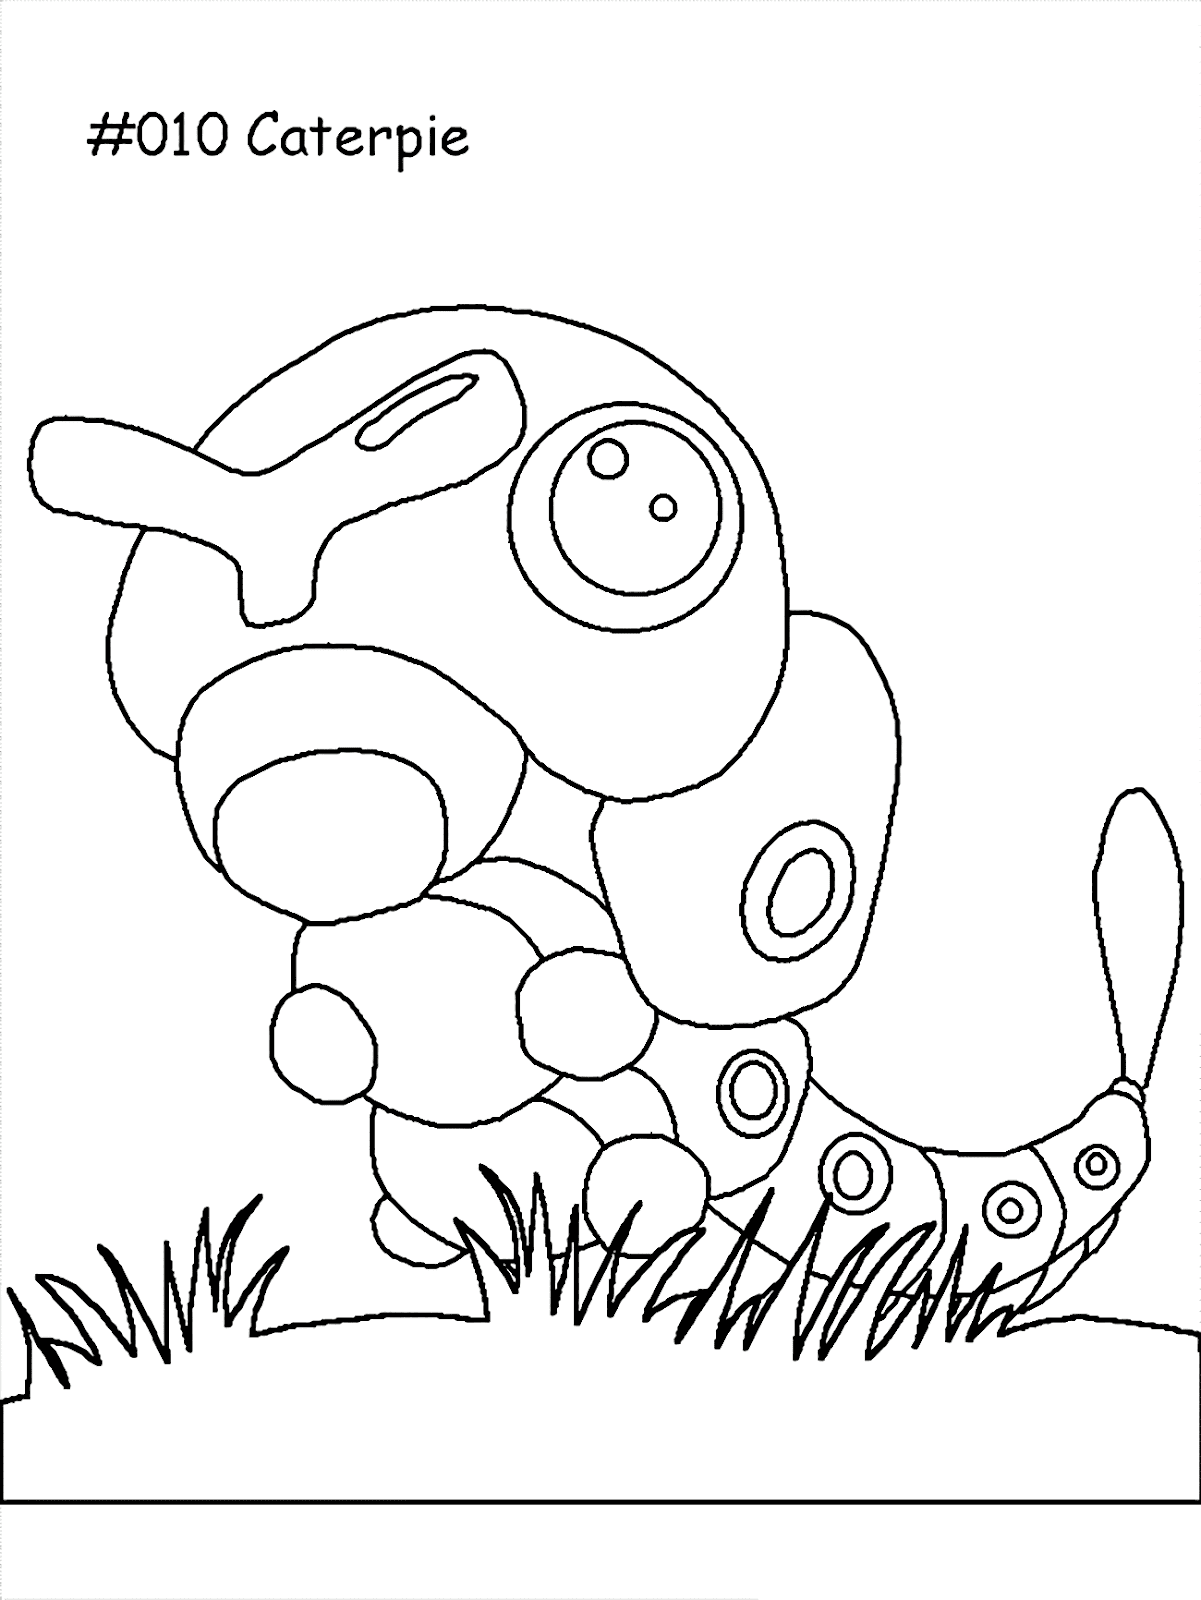 Caterpie Pokemon Coloring Pages | Dolphin coloring pages, Pokemon coloring  pages, Coloring pages